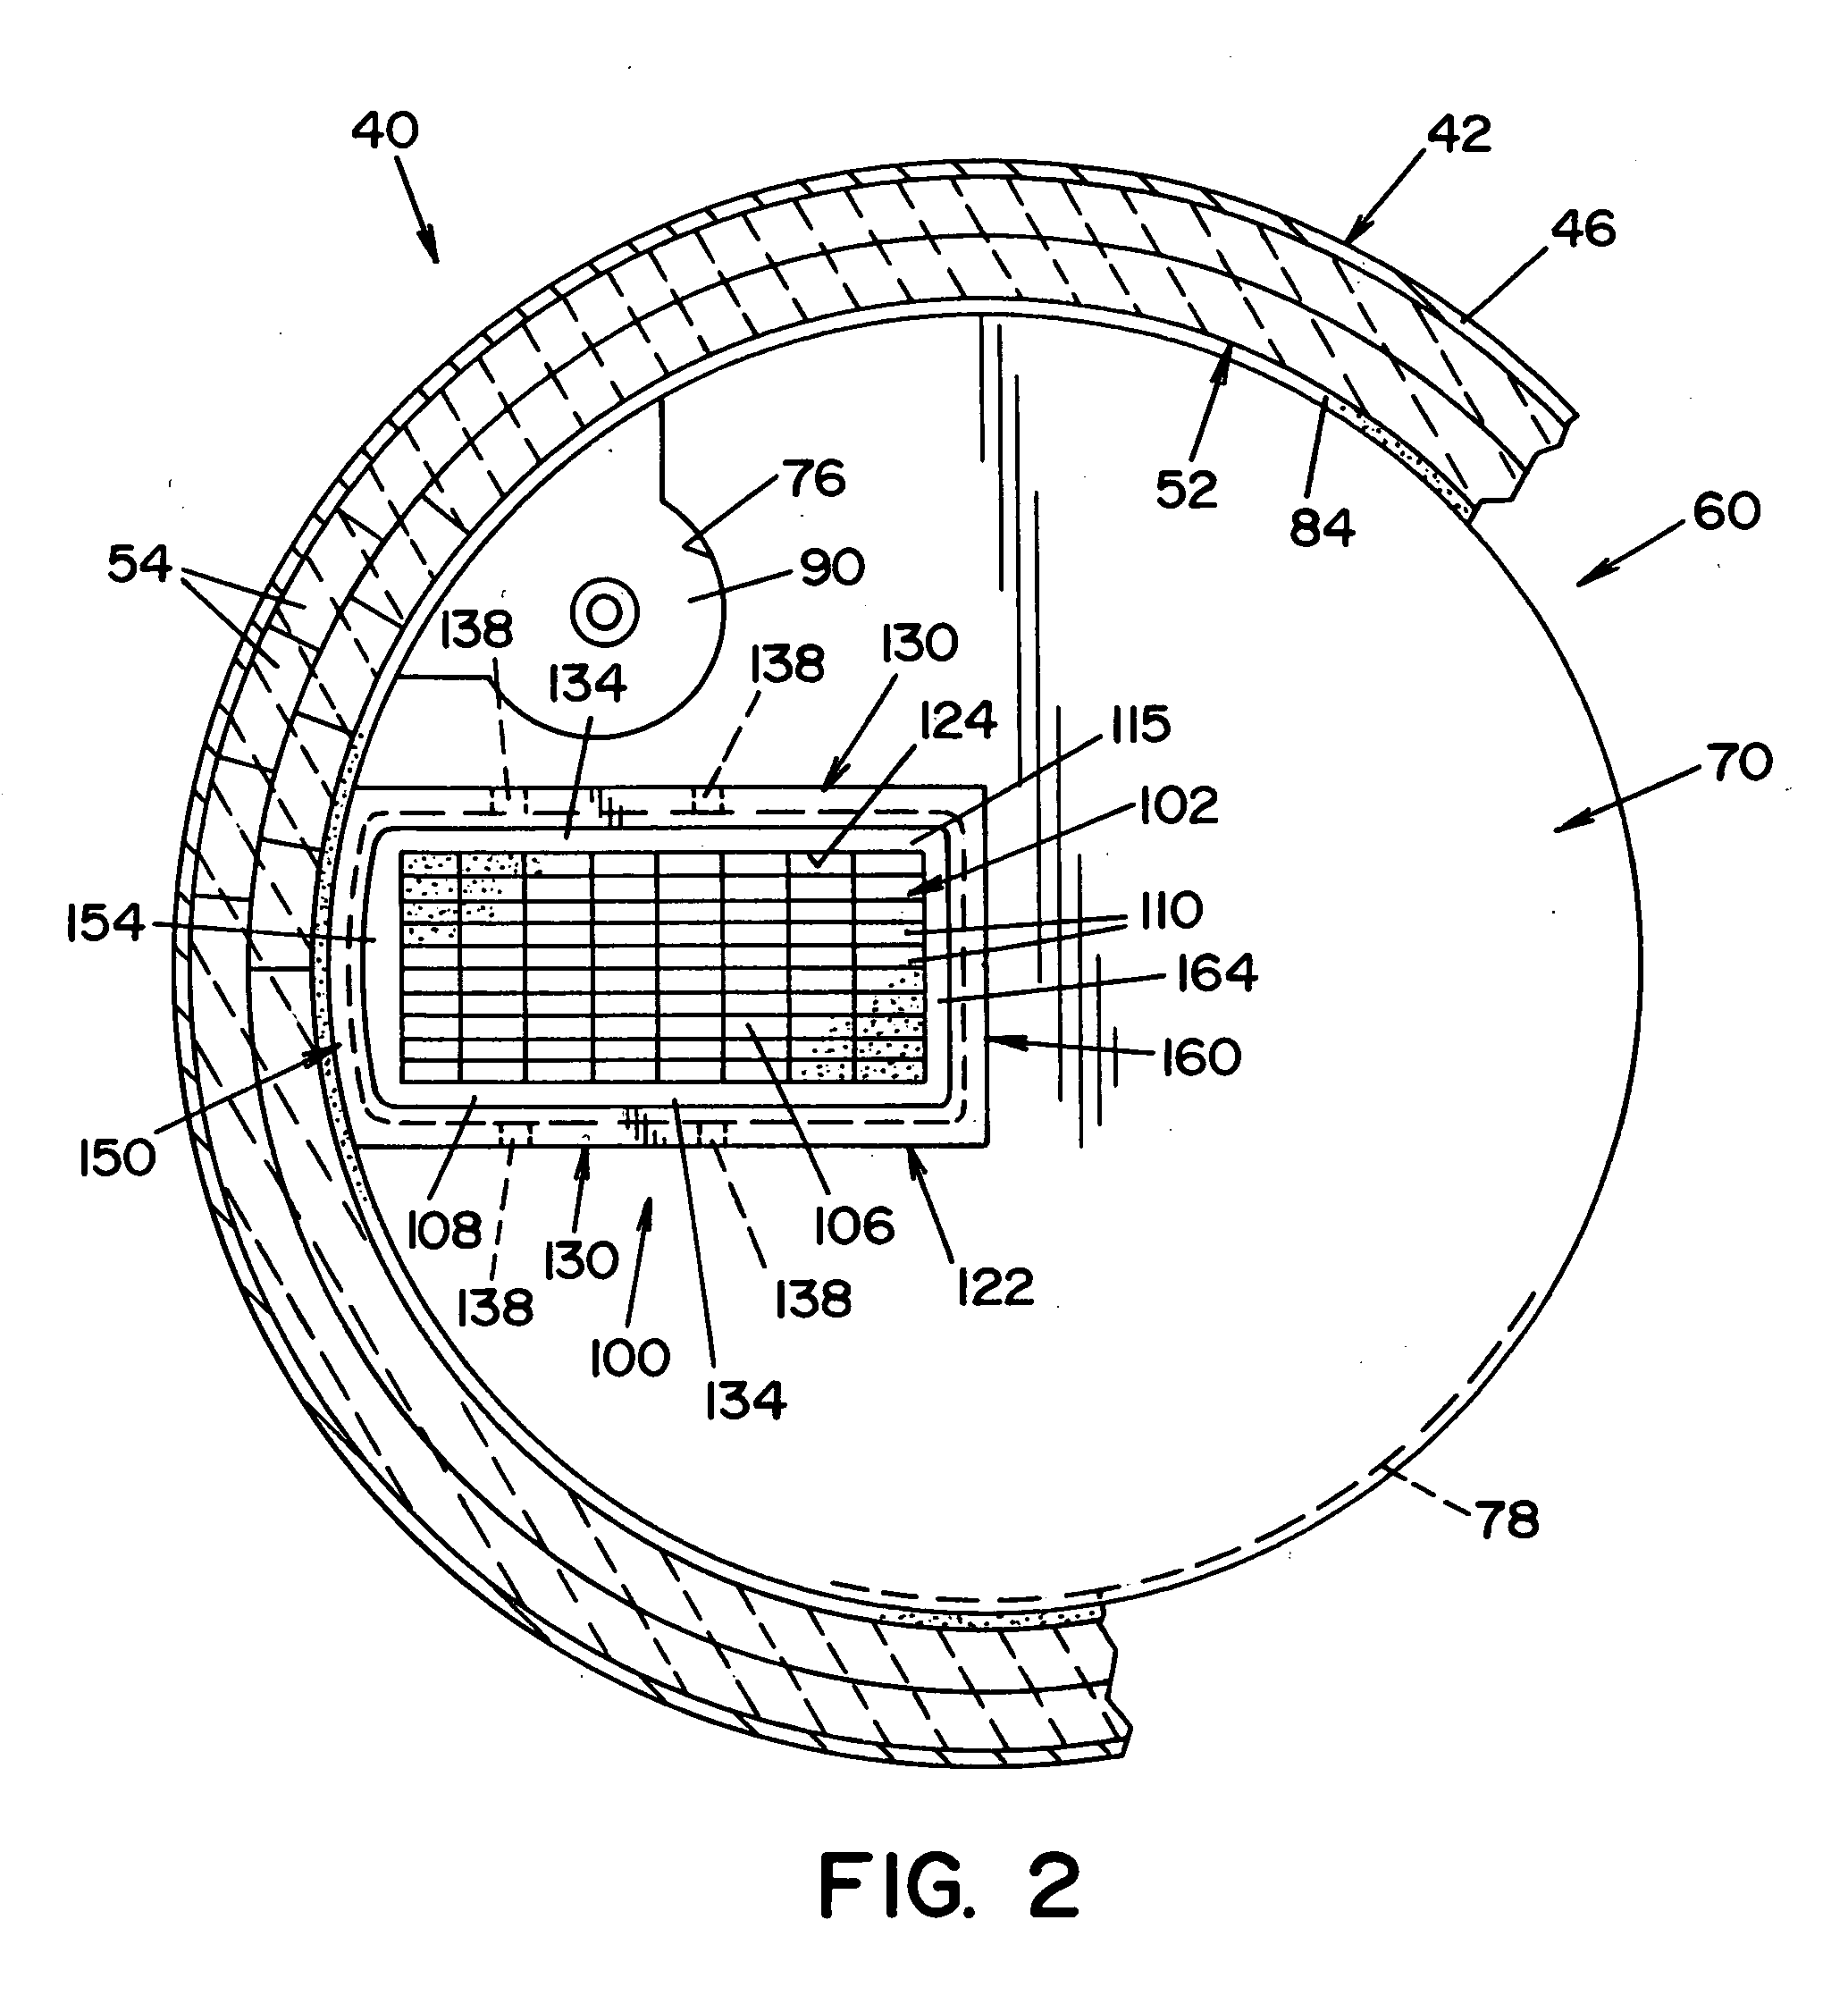 Impact pad for metallurgical vessels